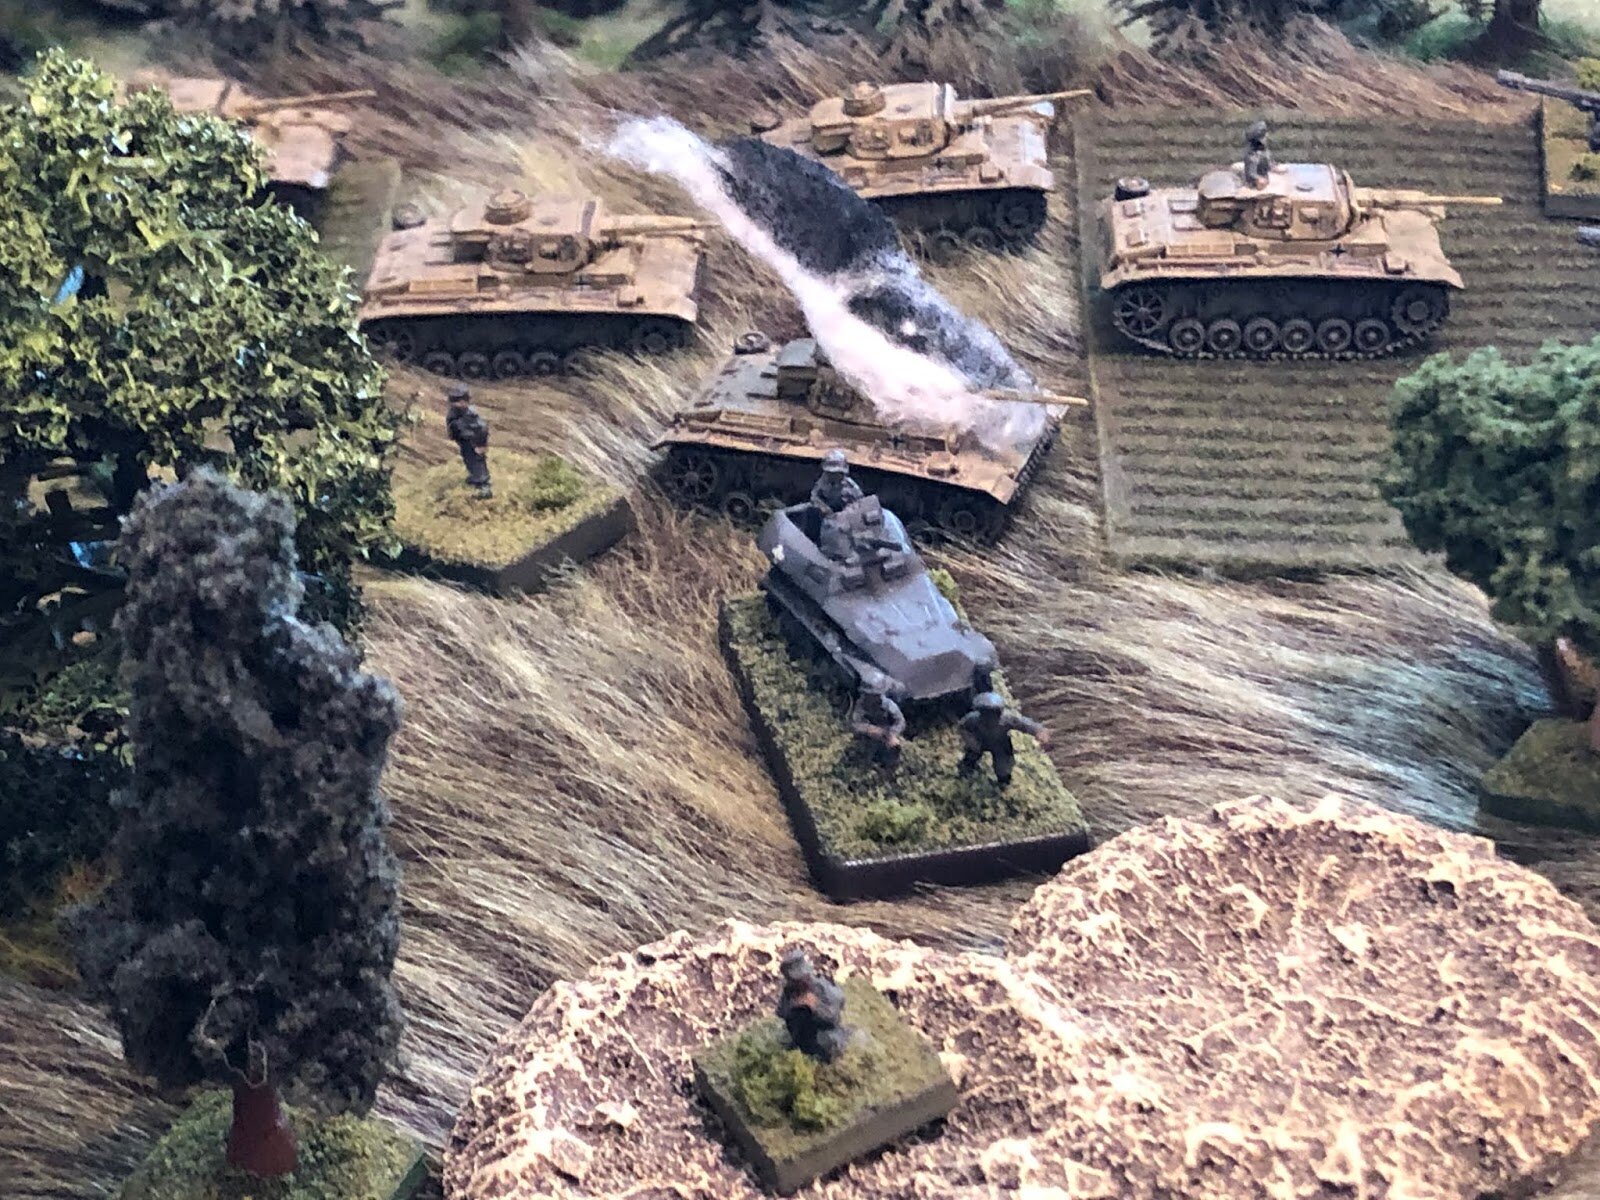  WHAM!!!  The German CO nearly wets himself as the panzer immediately behind him is struck and bursts into flames! 